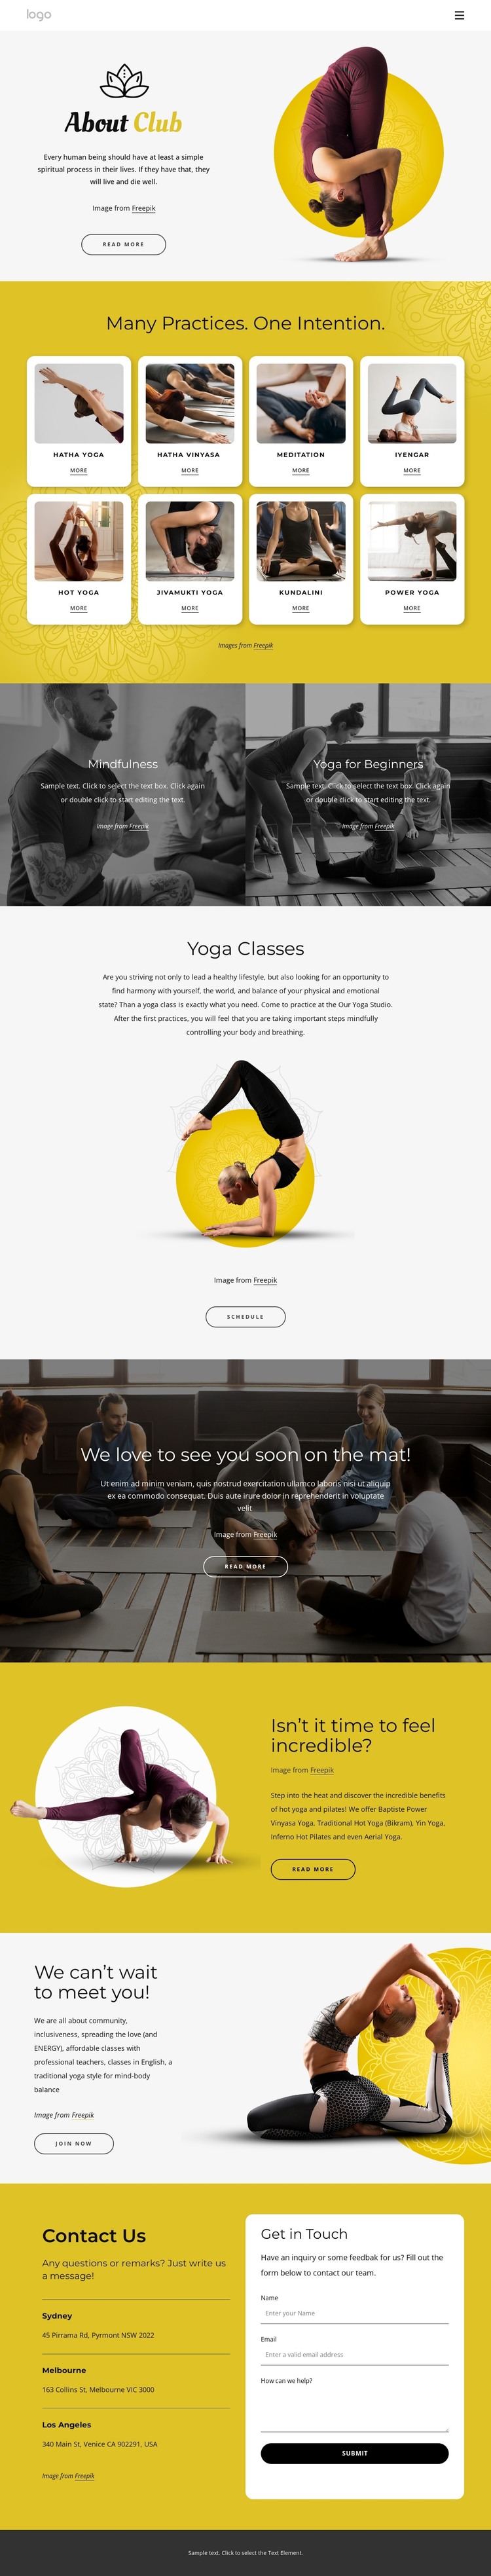 Physical, ethical and spiritual practice Web Design